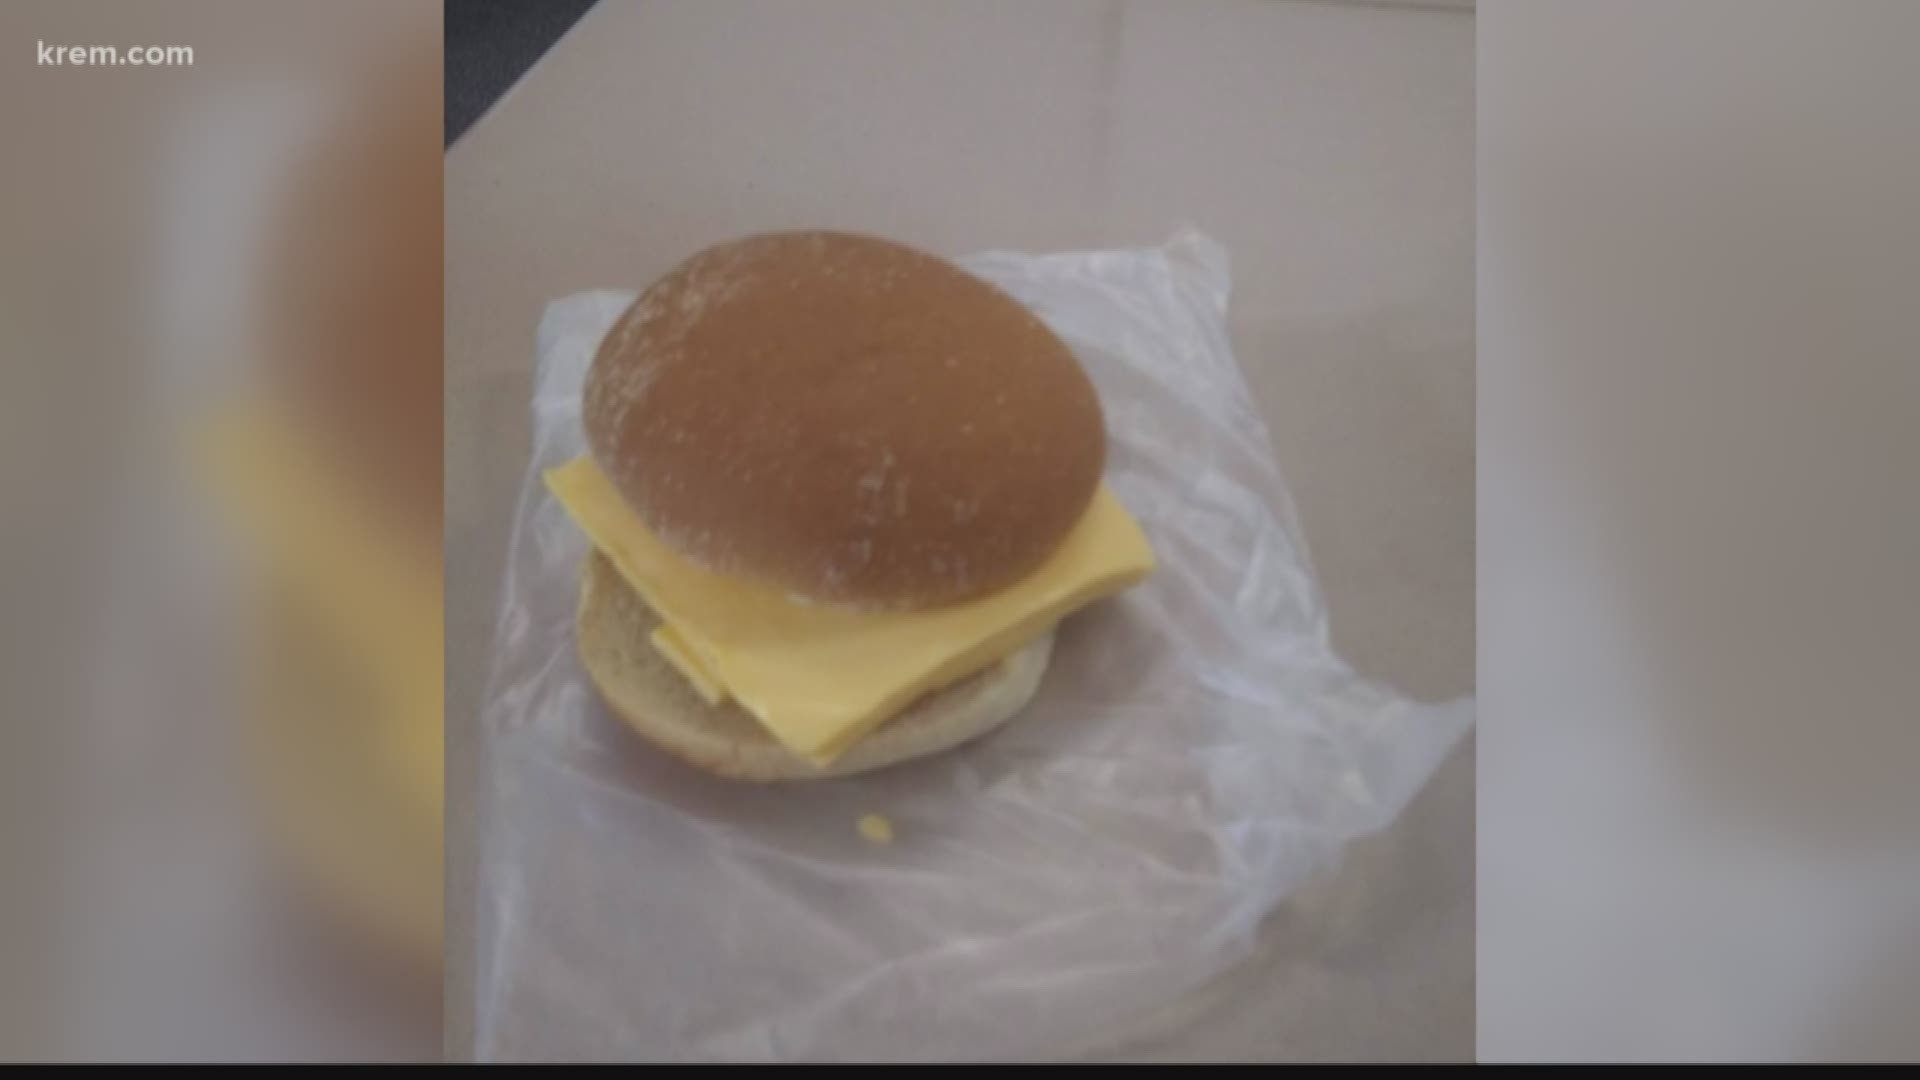 A Post Falls mom is upset by an alternative lunch her son got when he ran out of lunch money. She posted a photo that blew up on Facebook.